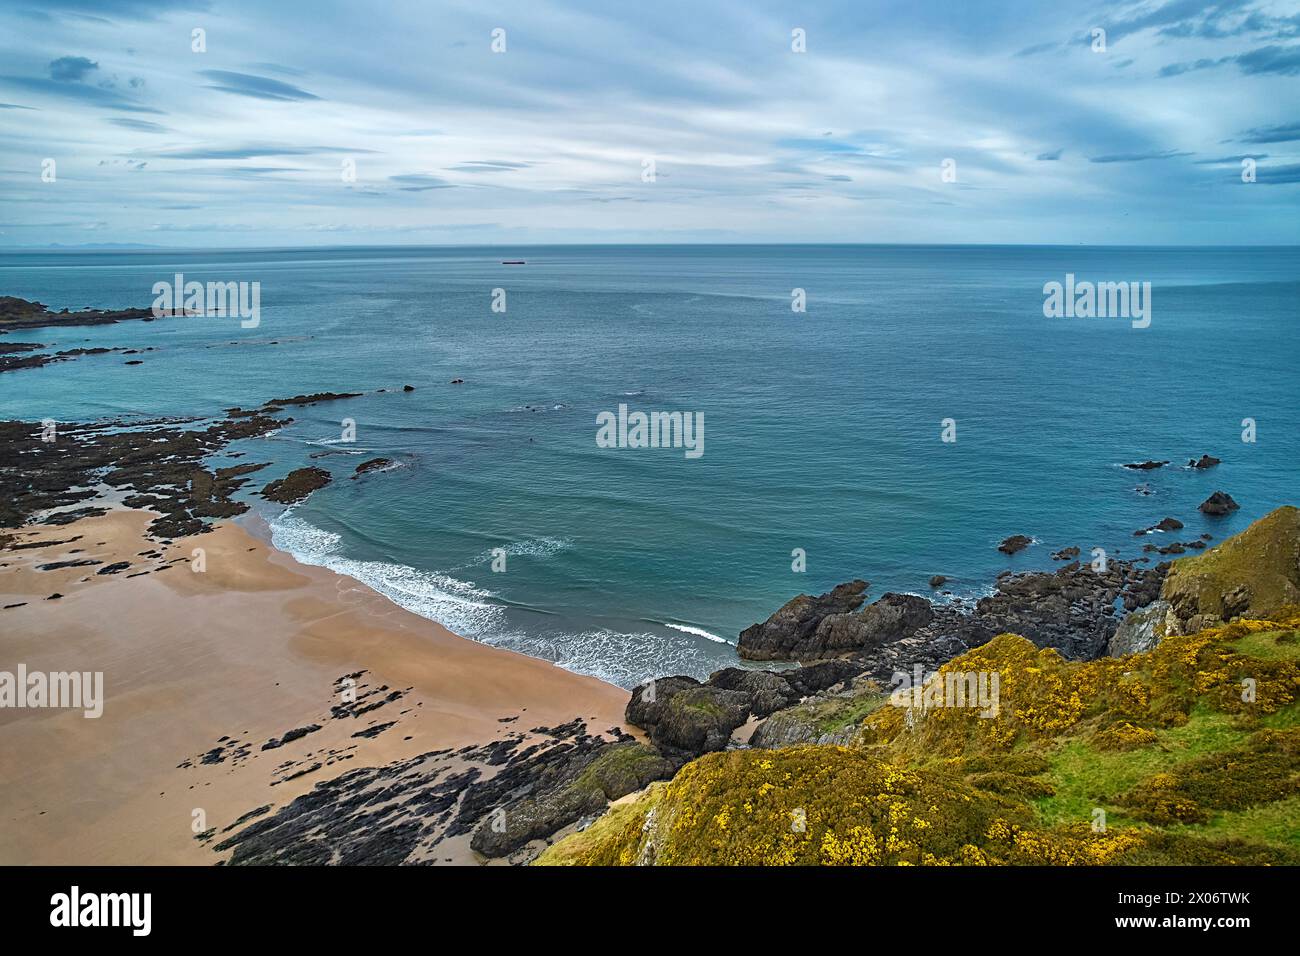 Sunnyside Beach Cullen Scotland sandy beach with rocks and the Moray Firth with a calm sea in the evening Stock Photo